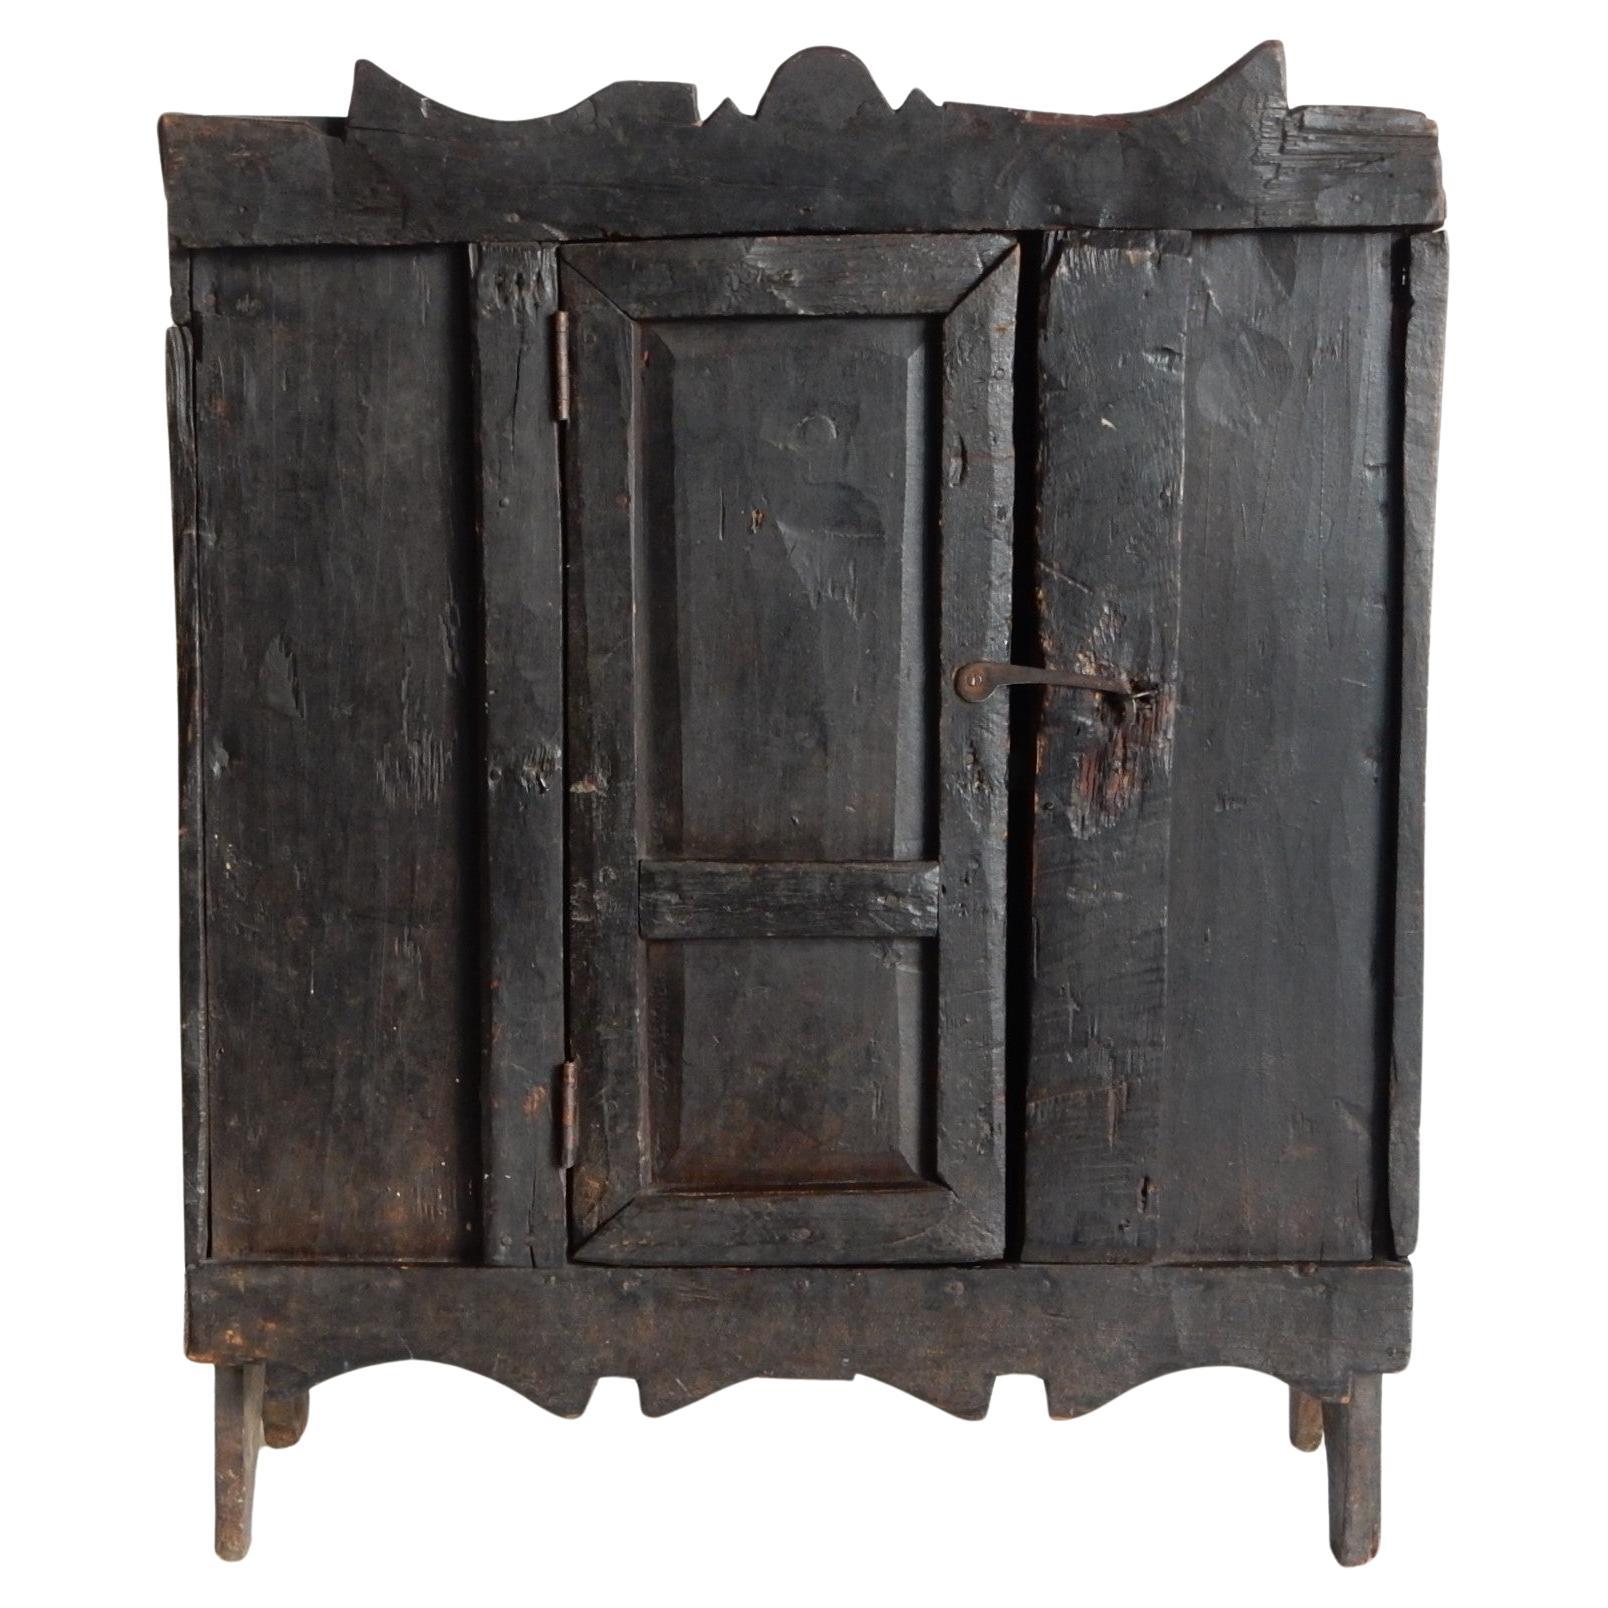 Folk Art rustic Travail Populaire small cabinet. 19th century.
This cabinet is equally a sculpture as it is a functional piece.
Tons of character in it's great original condition.